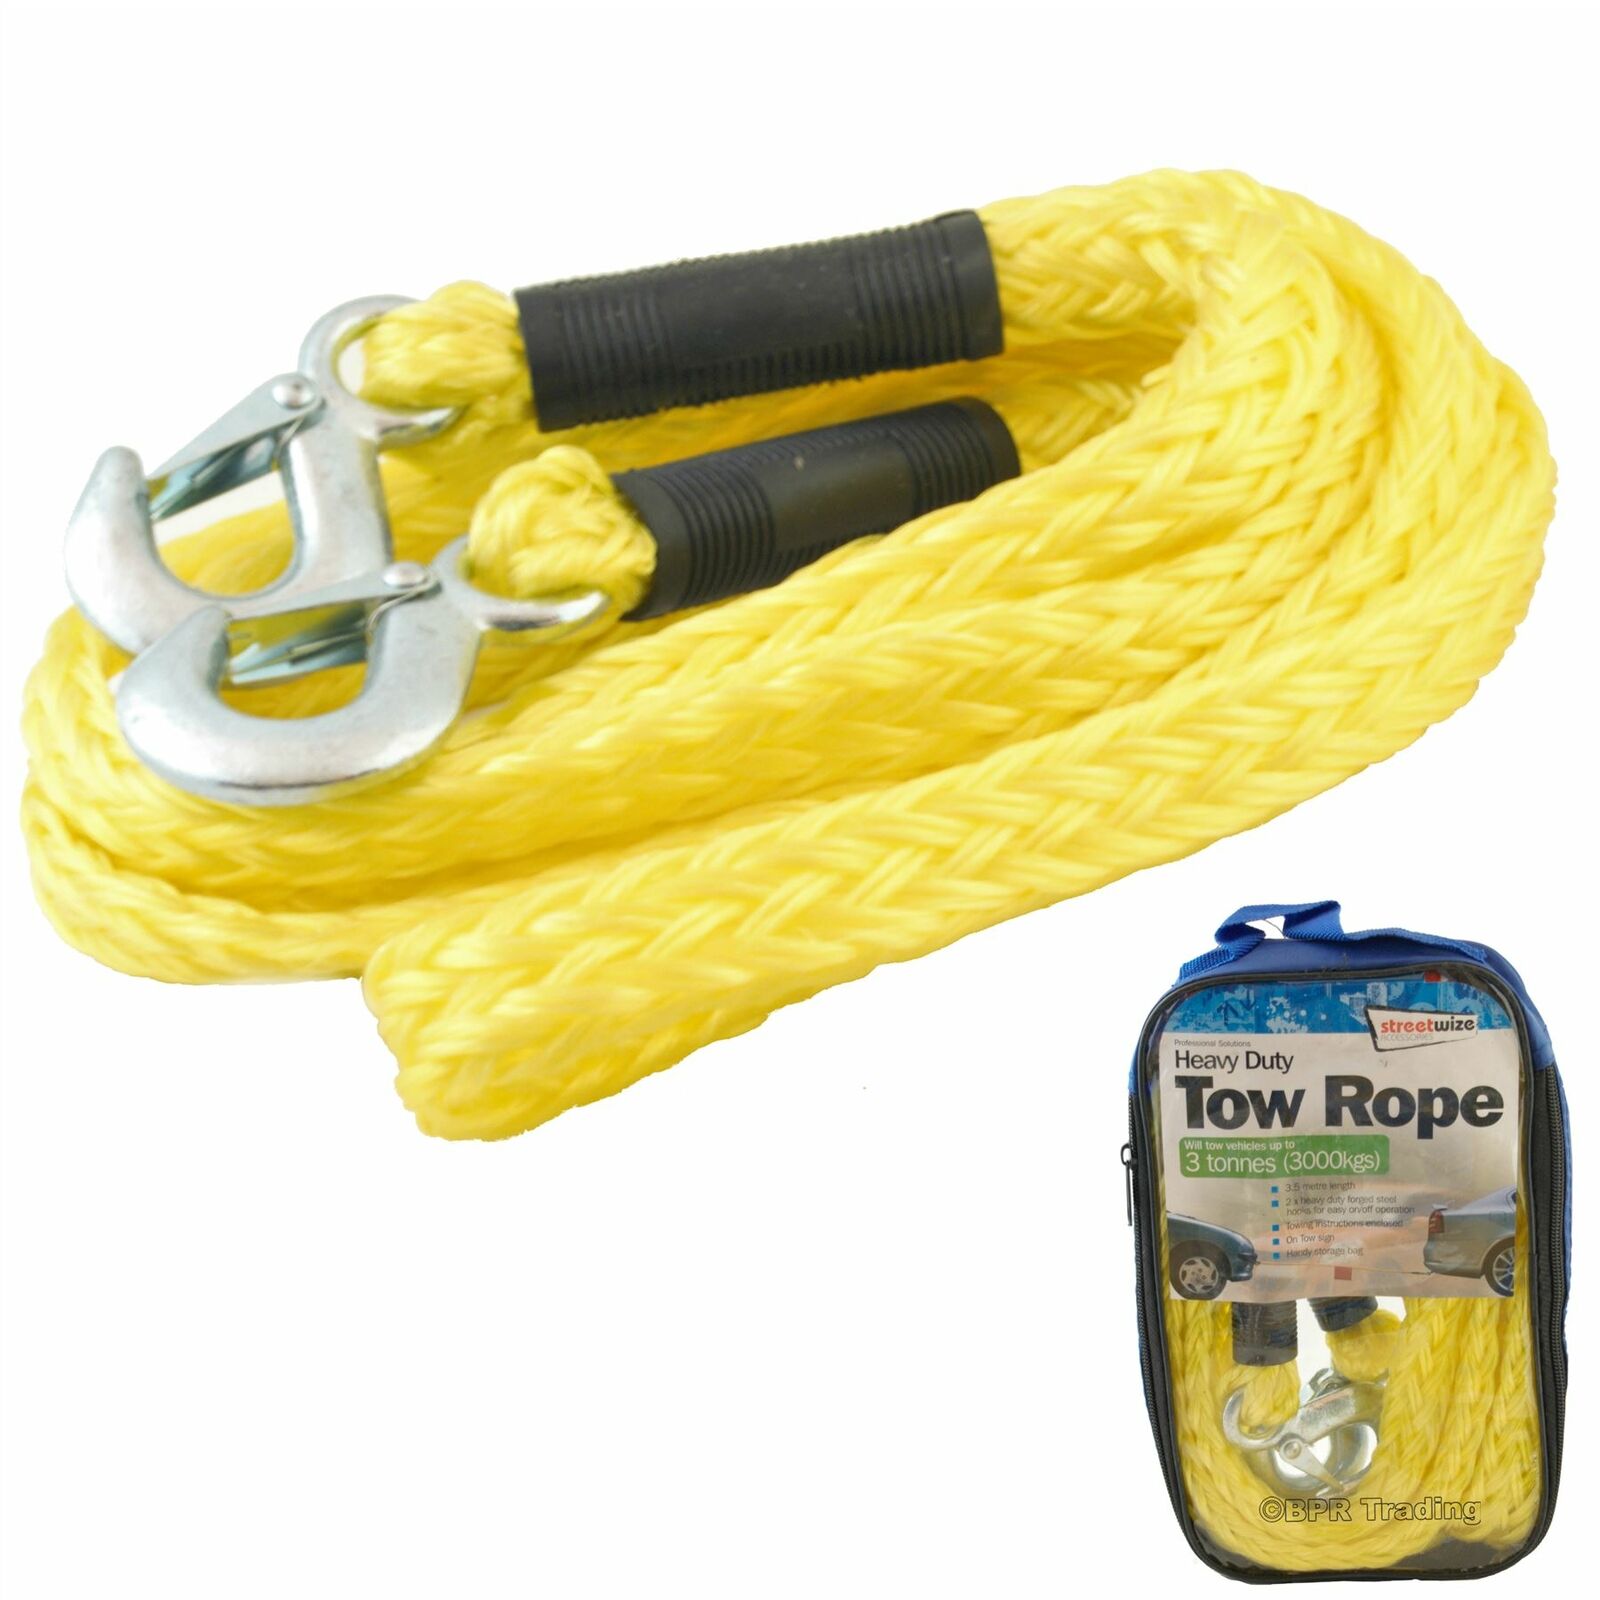 TOW ROPE HEAVY DUTY 6.5 TONNE TOWING ROPE STRAP 3.5M LONG 4X4 VANS